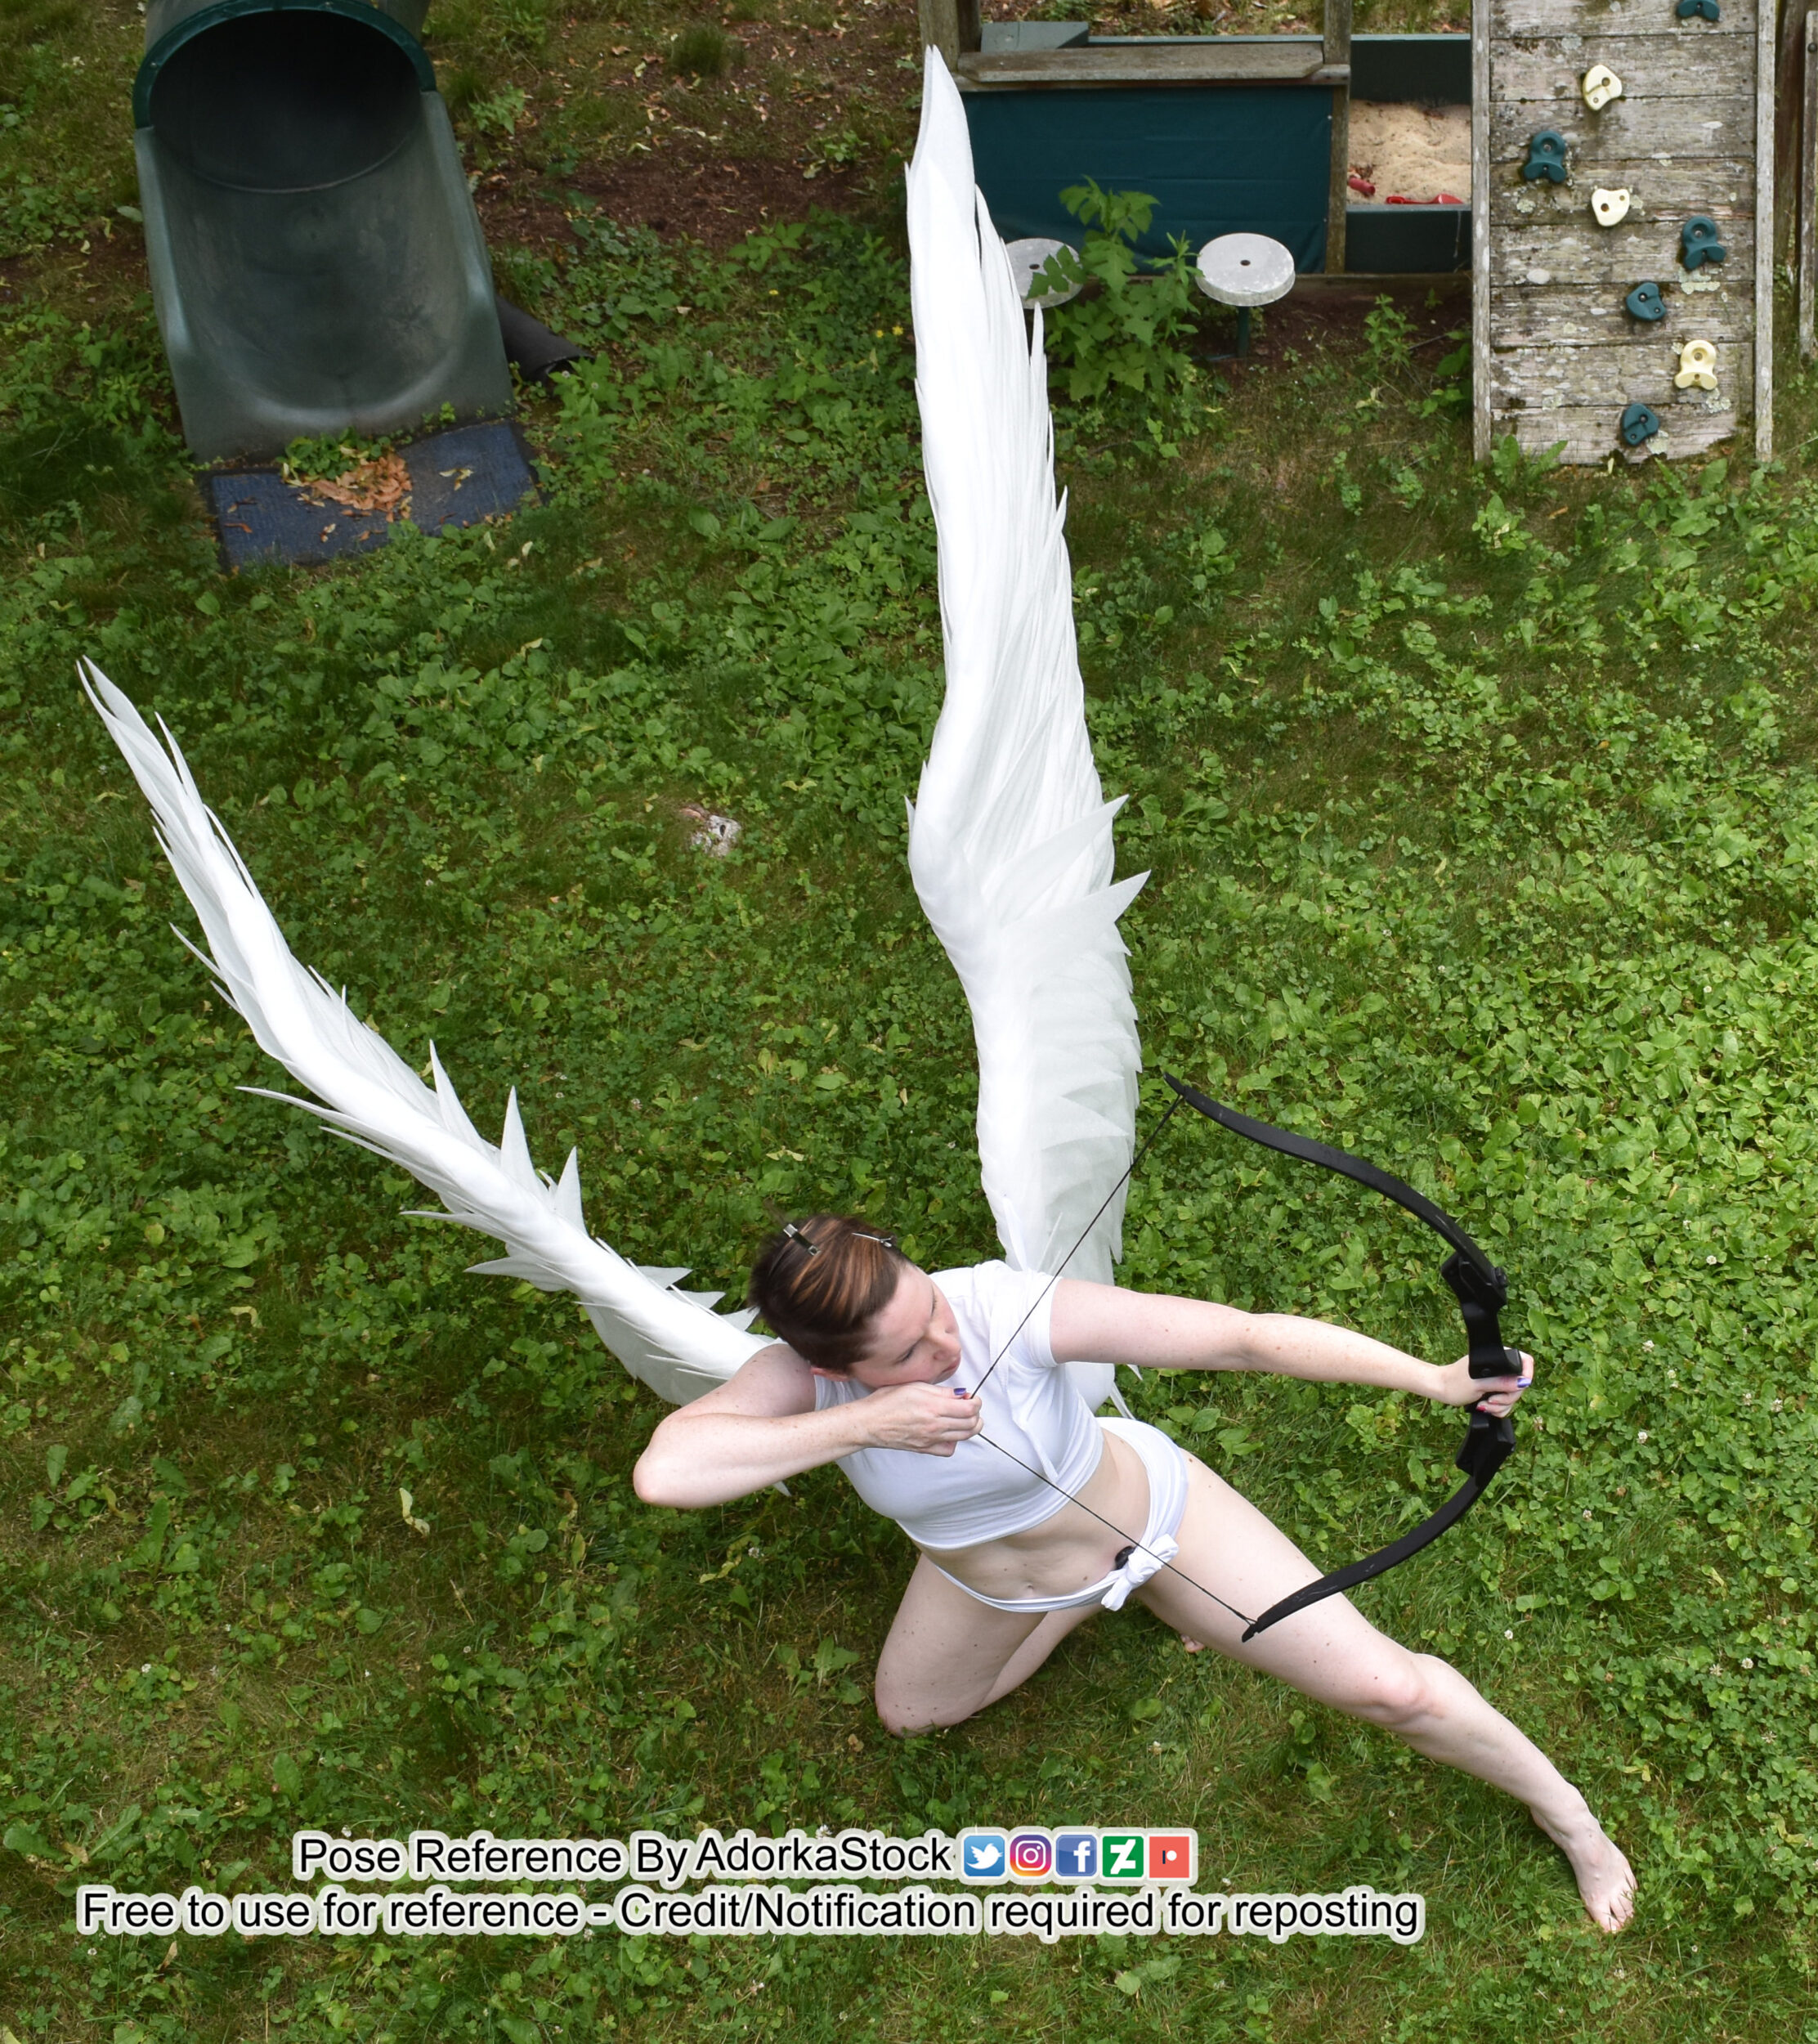 Thin, white, female pose reference model in kneeling pose with very large wings, shooting a bow and arrow while in a kneeling lunge.